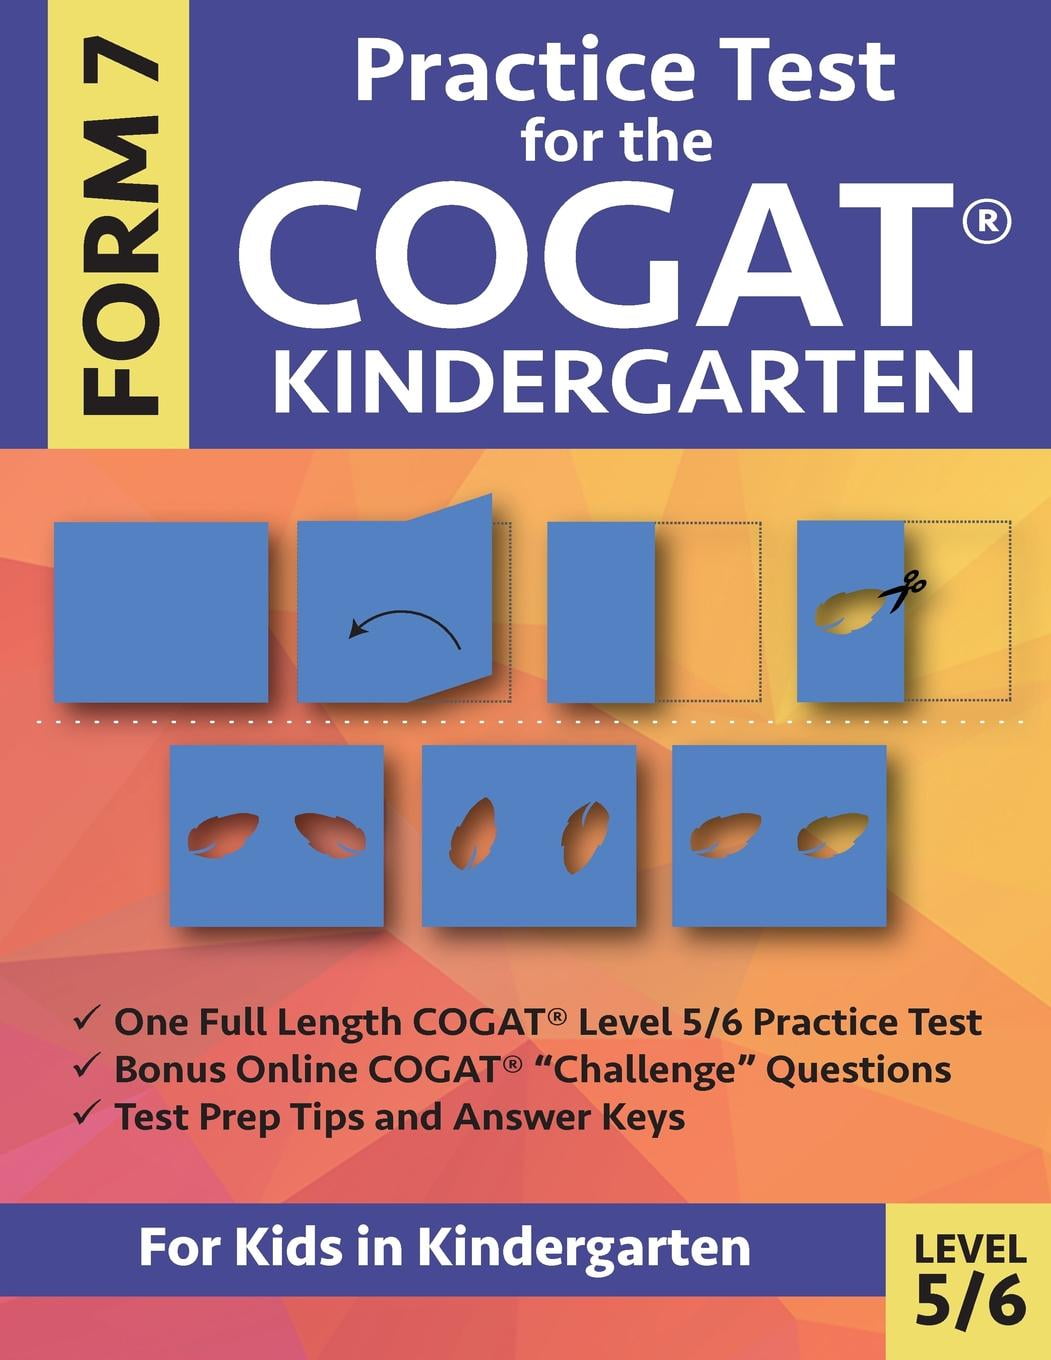 practice-test-for-the-cogat-kindergarten-form-7-level-5-6-gifted-and